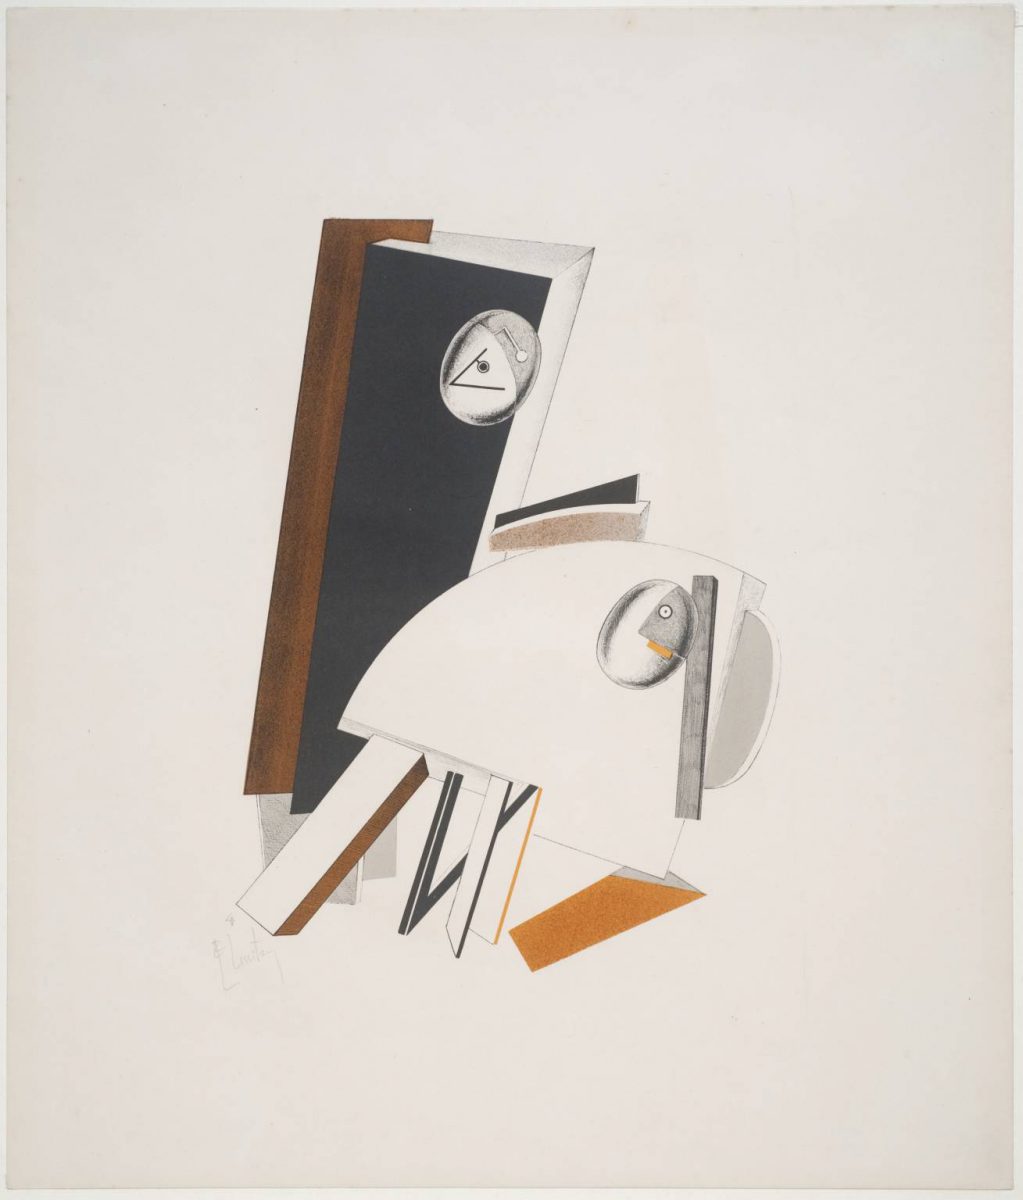 Anxious People 1923 by El Lissitzky 1890-1941